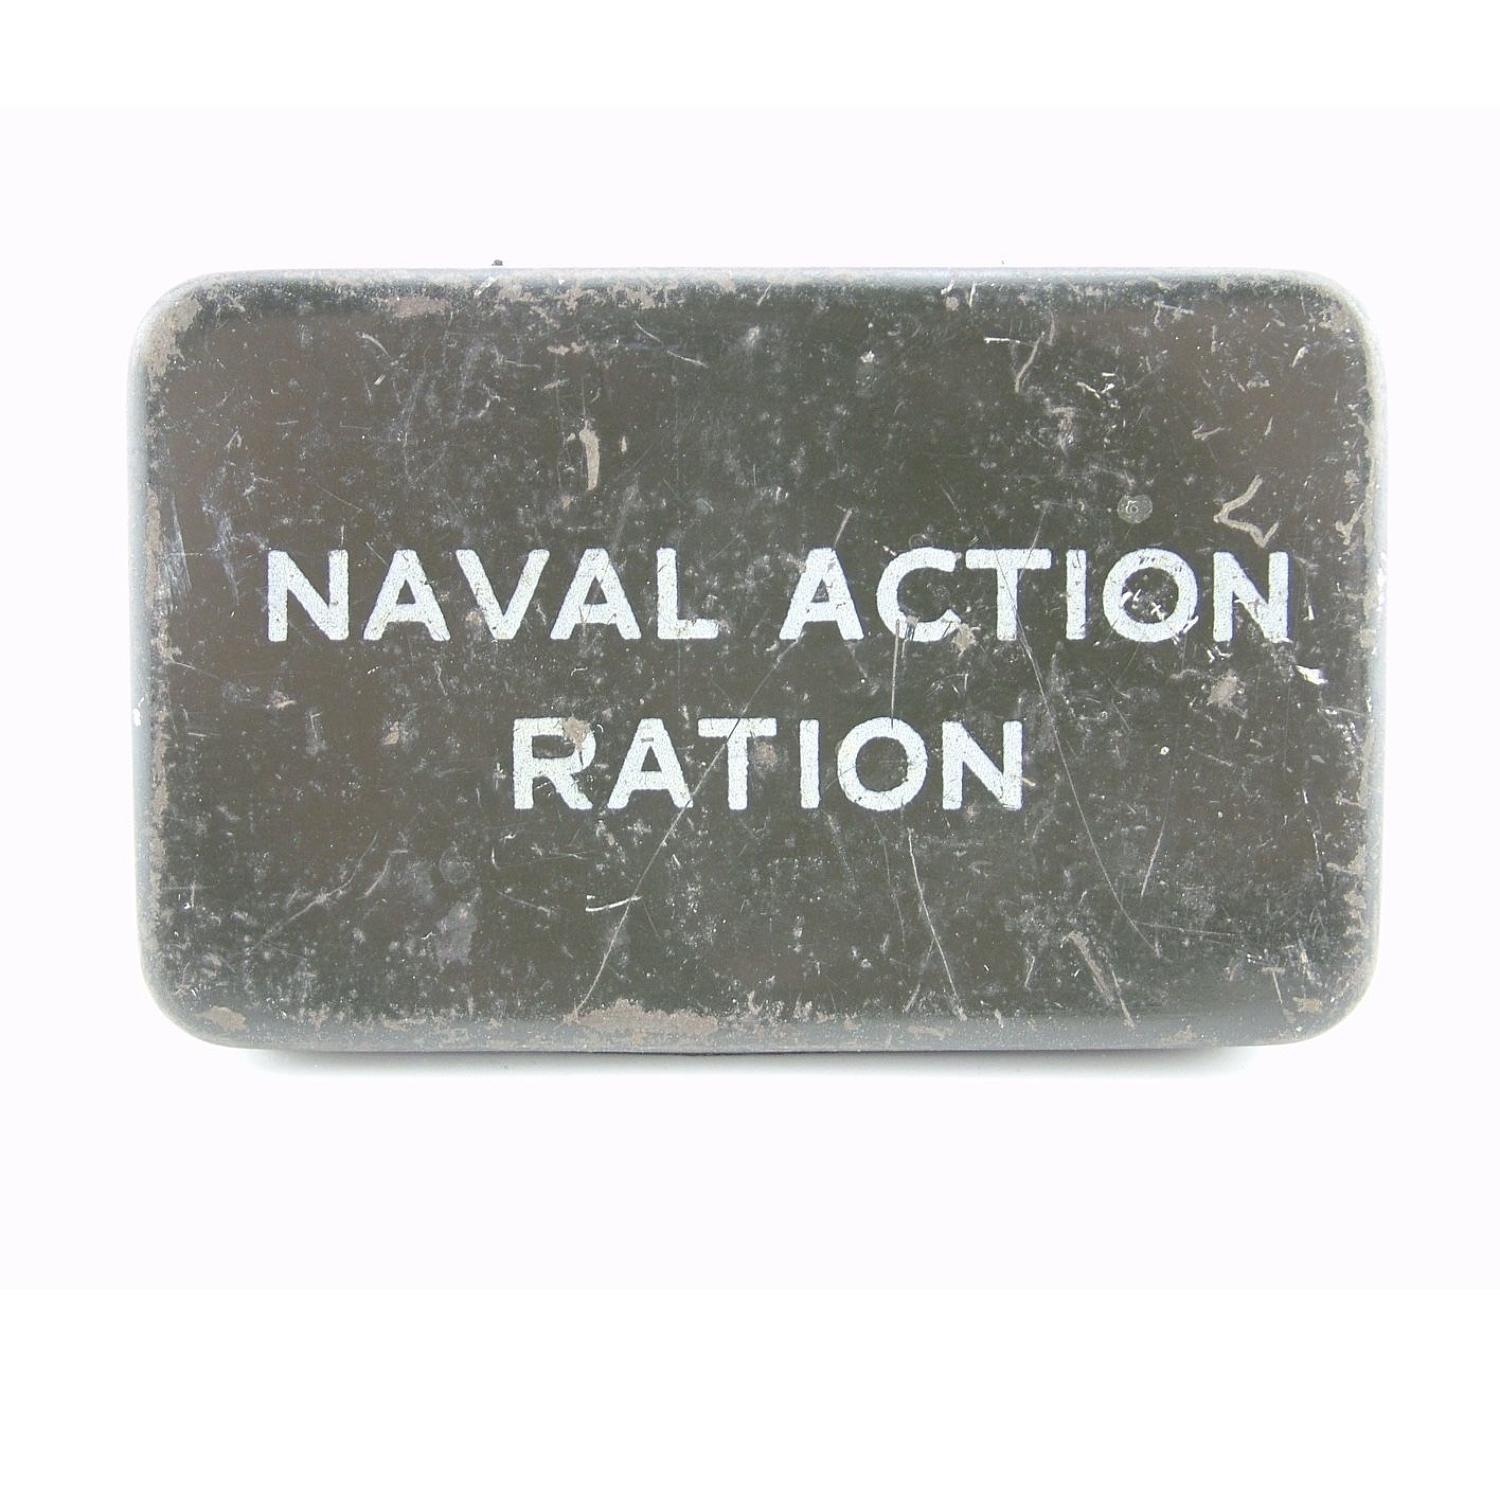 Naval Action Ration